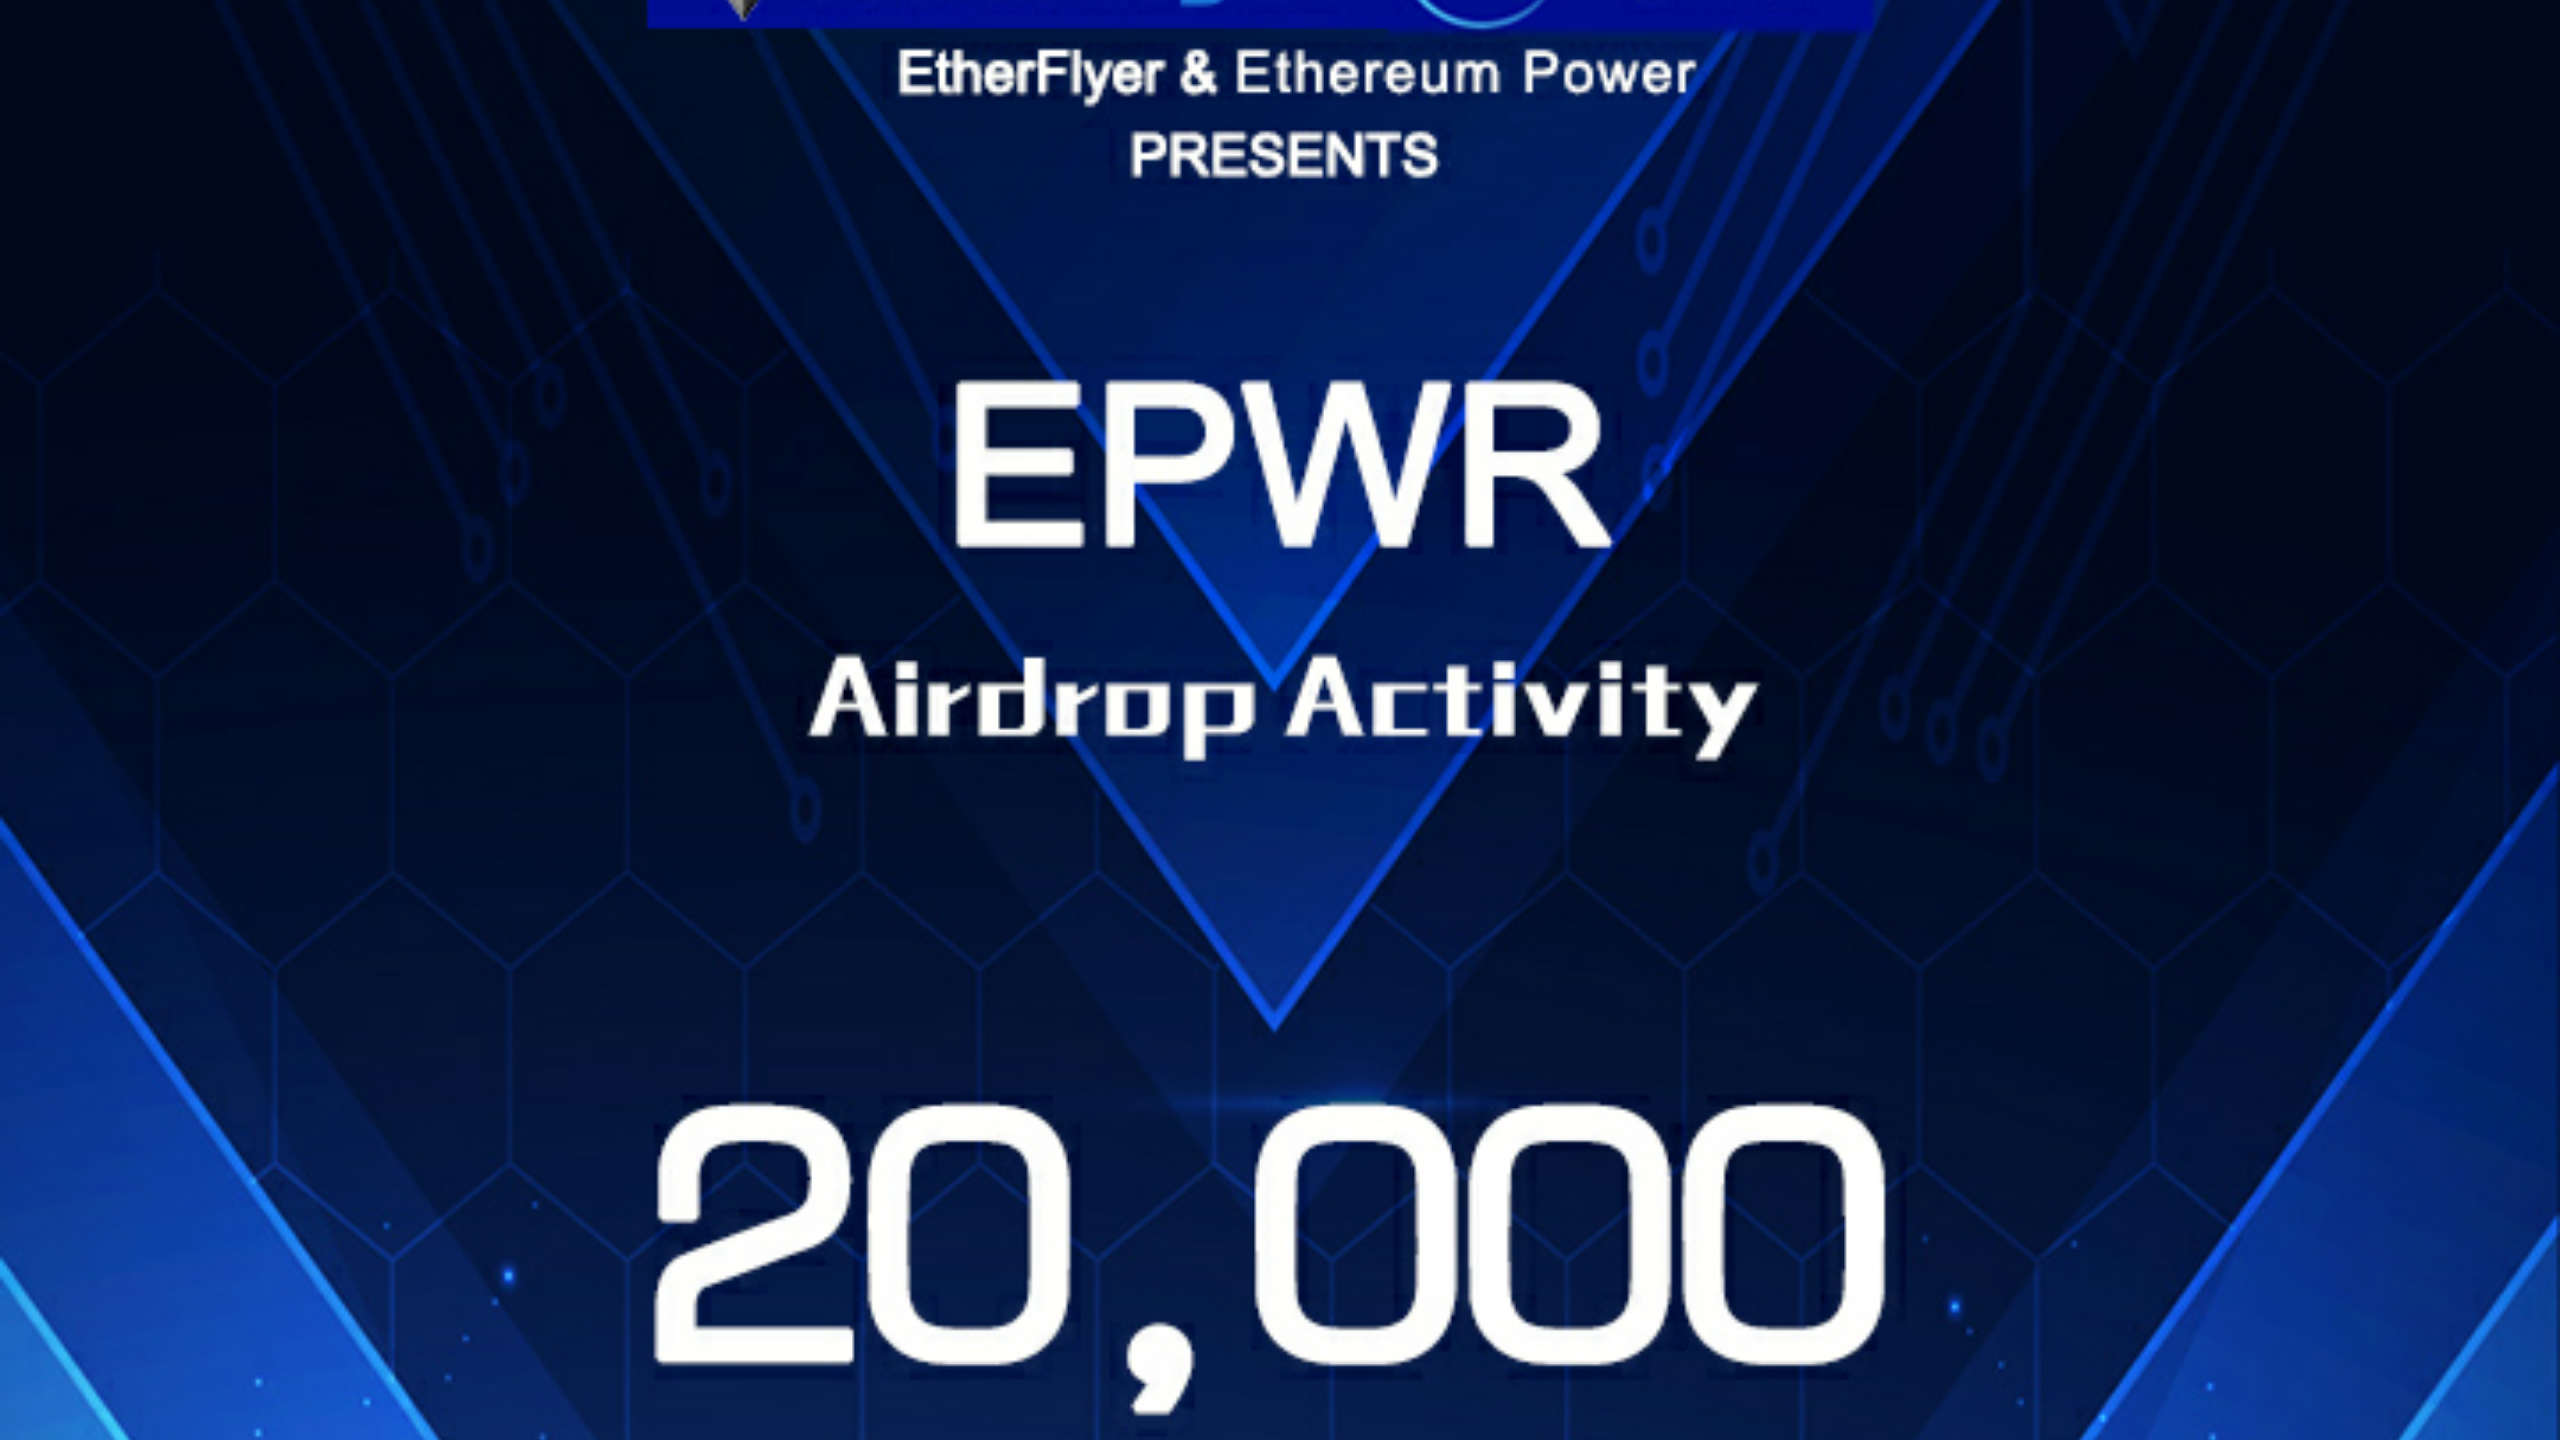 Epwr airdrop total 20.000epwr di bagikan no kyc task easy pizzy market ethflyer